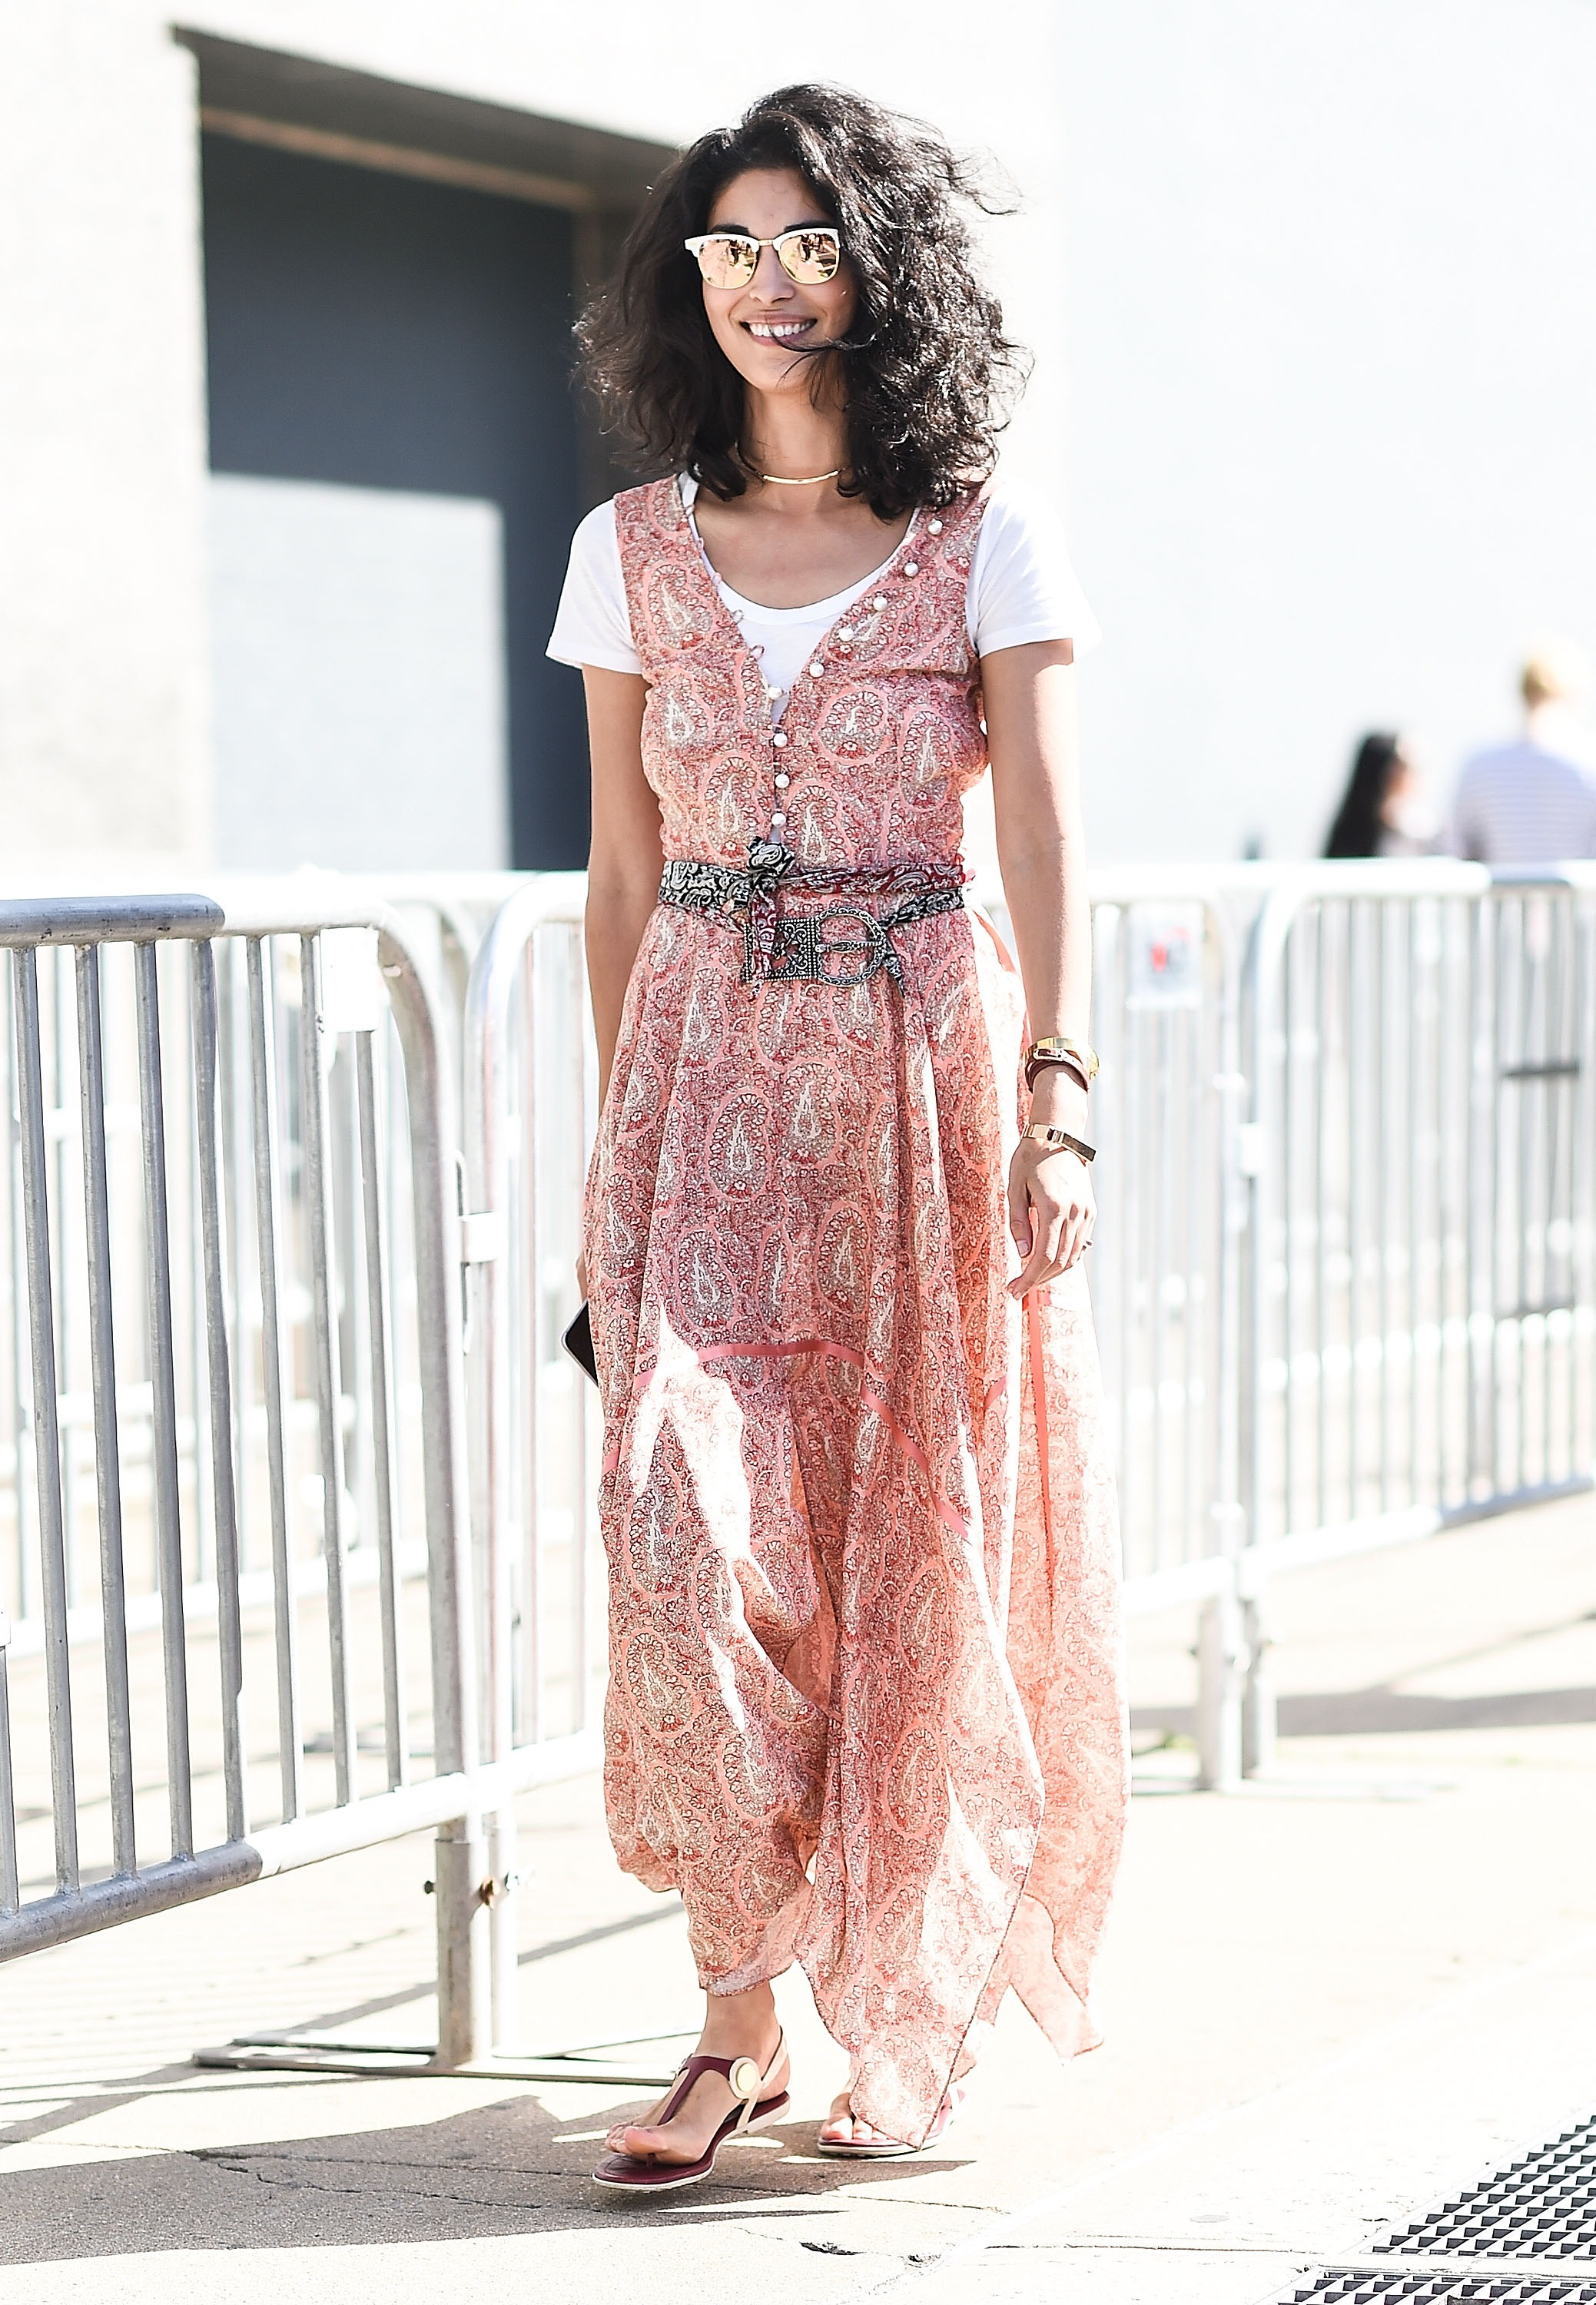 Caroline Issa took this trend in a bohemian direction with a flowy maxi dress and flat sandals.